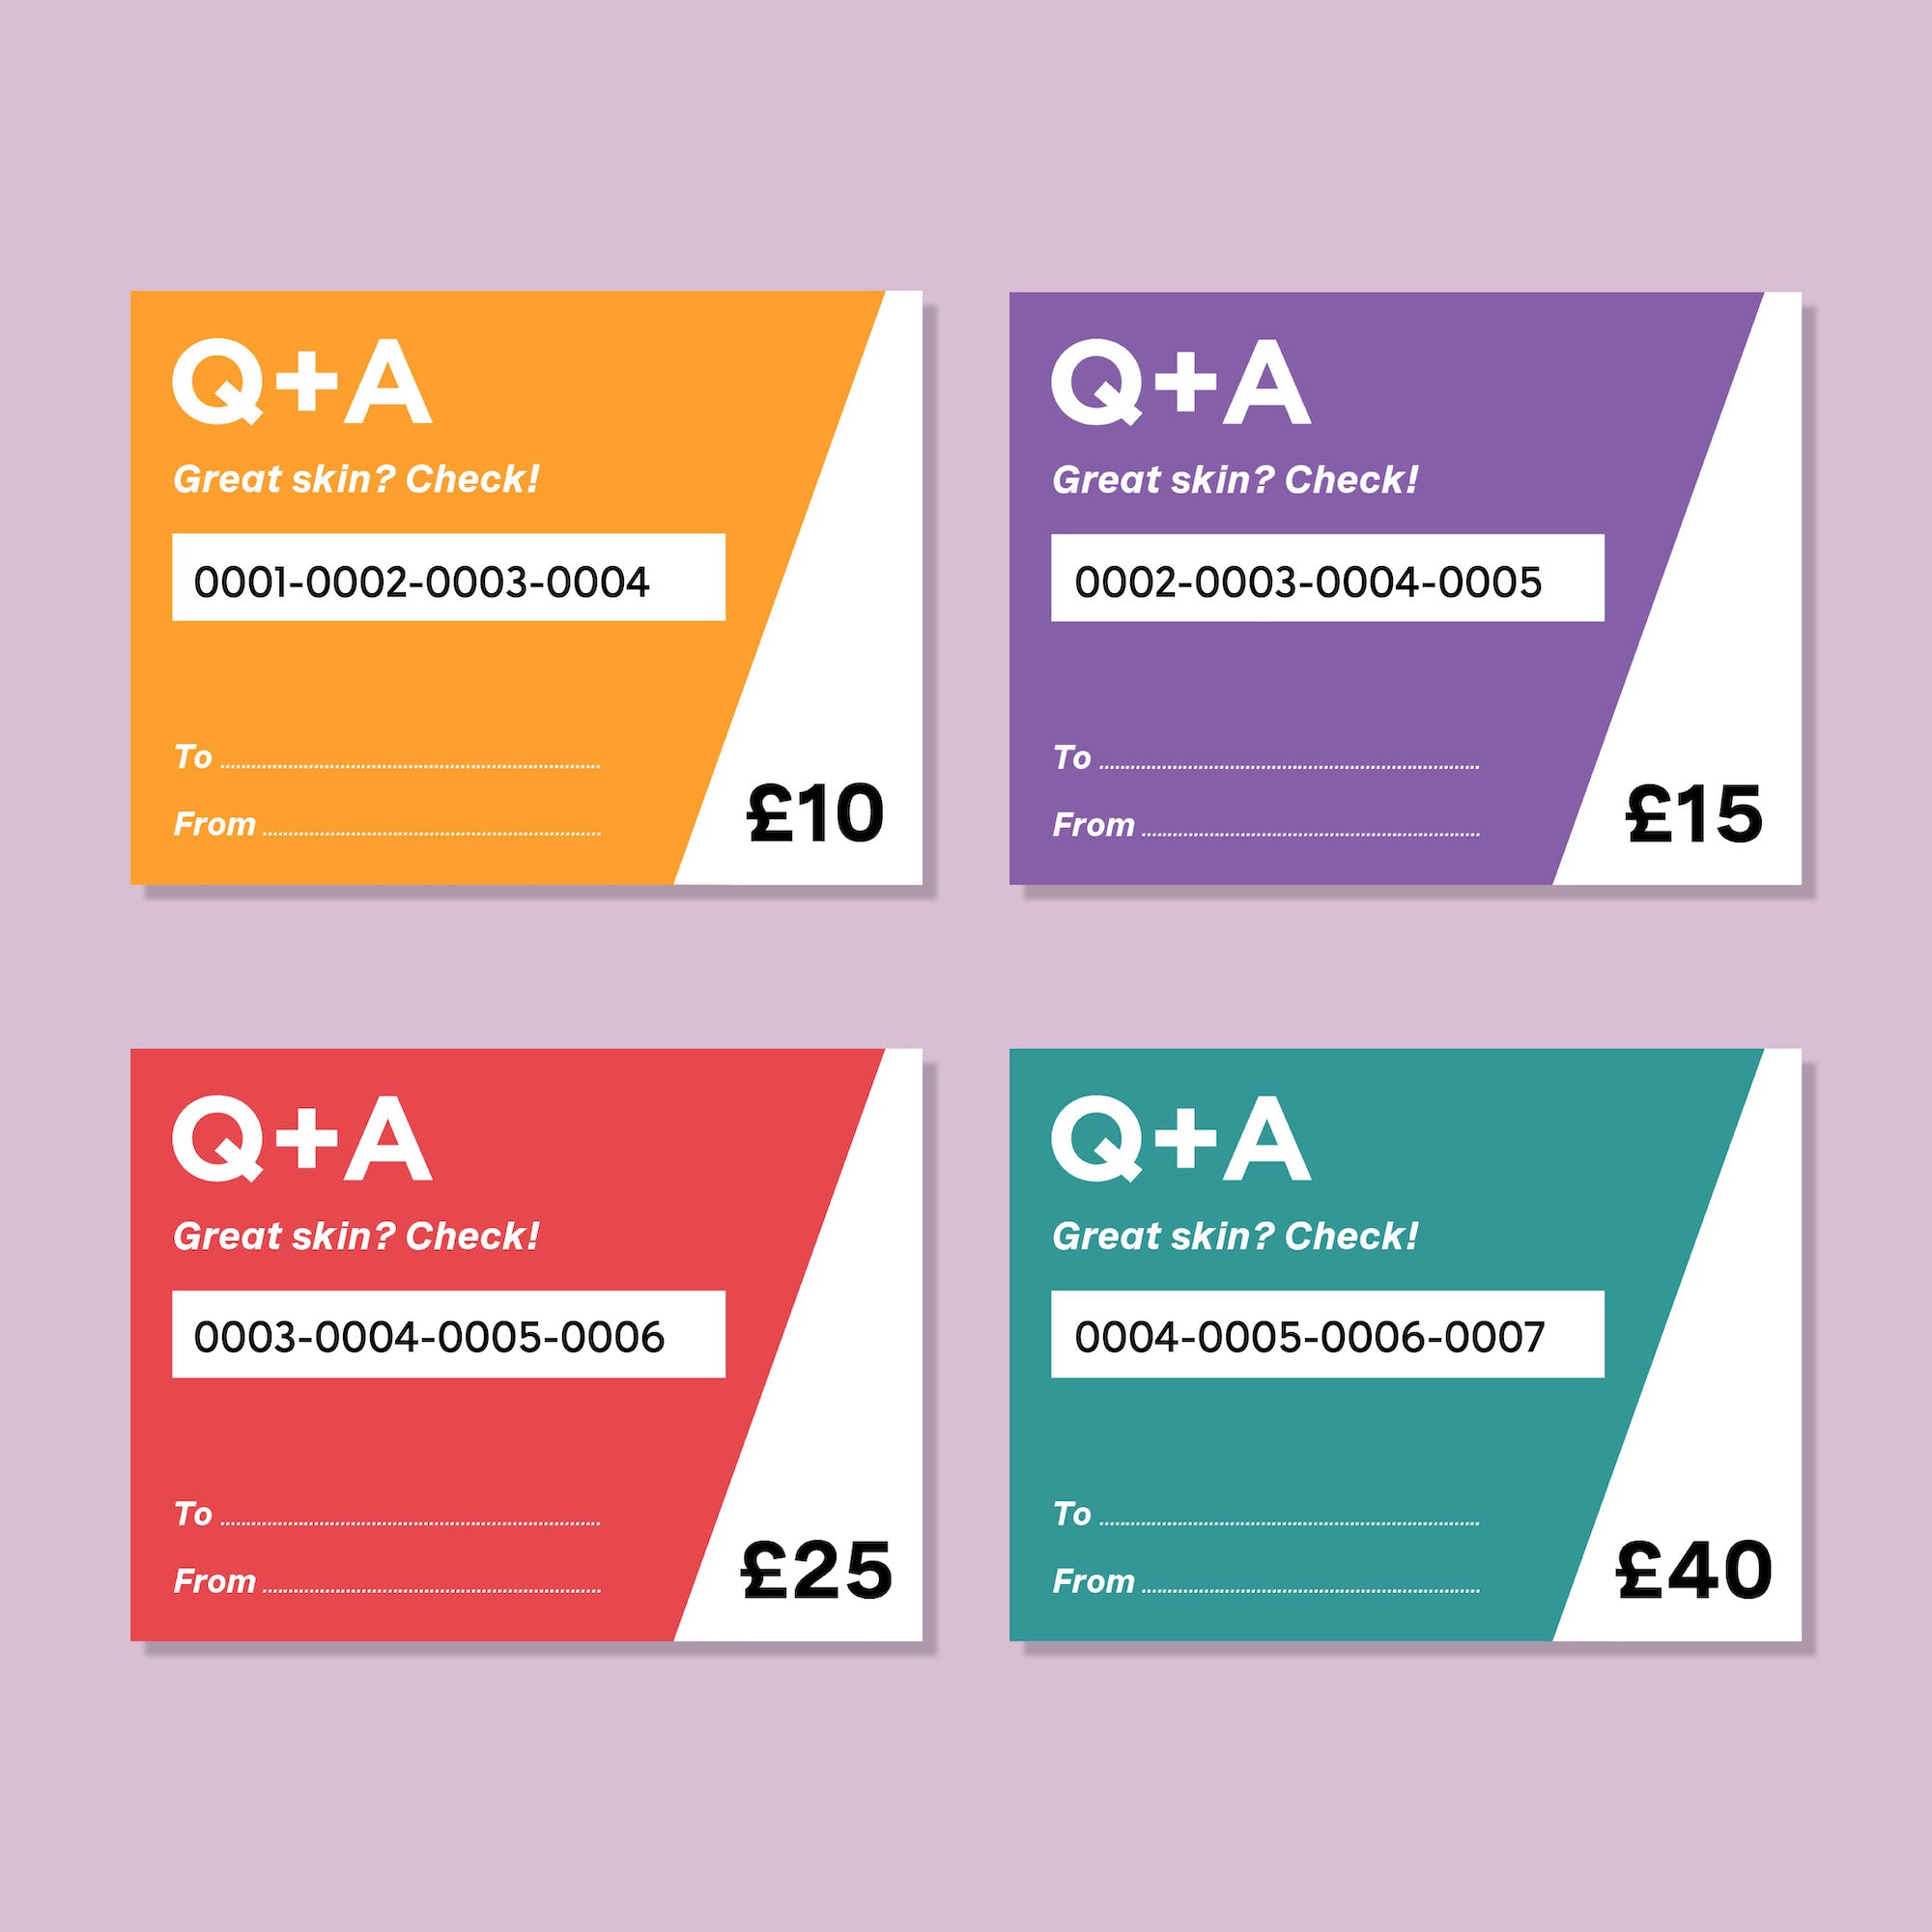 Q+A Giftcards